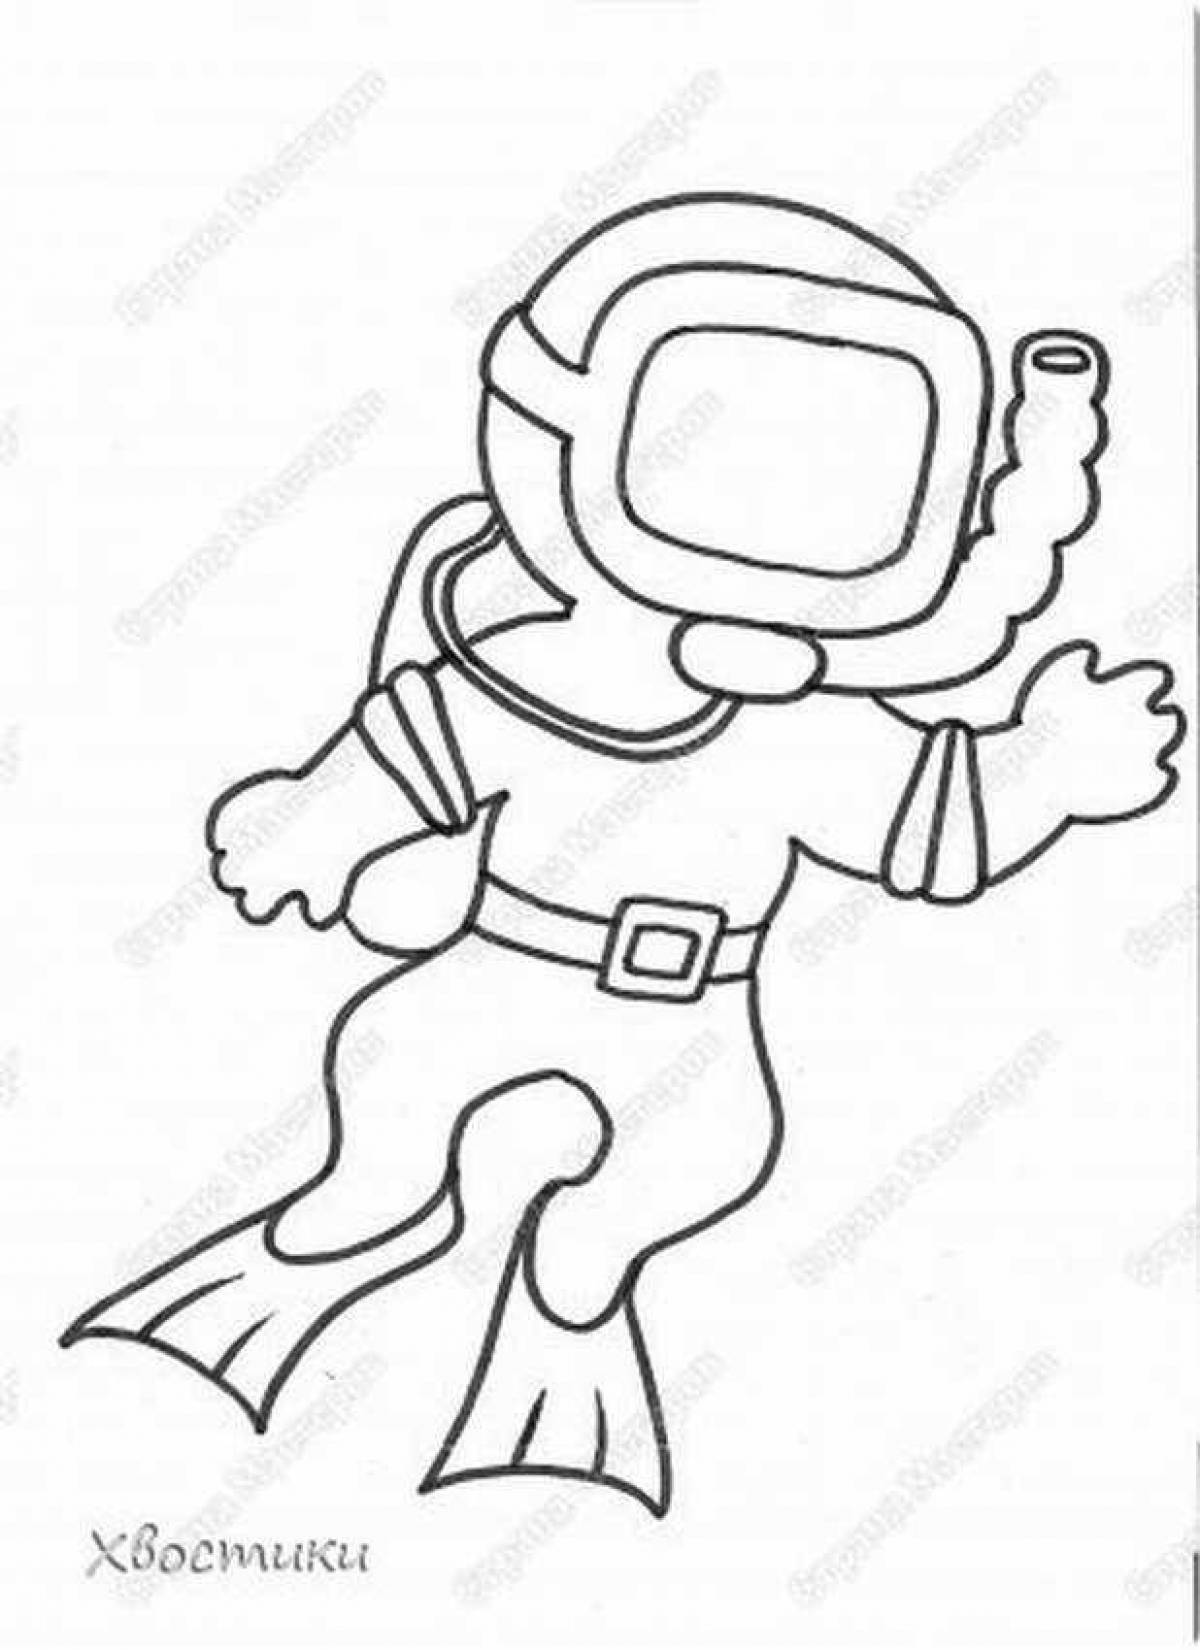 Charming diver coloring page